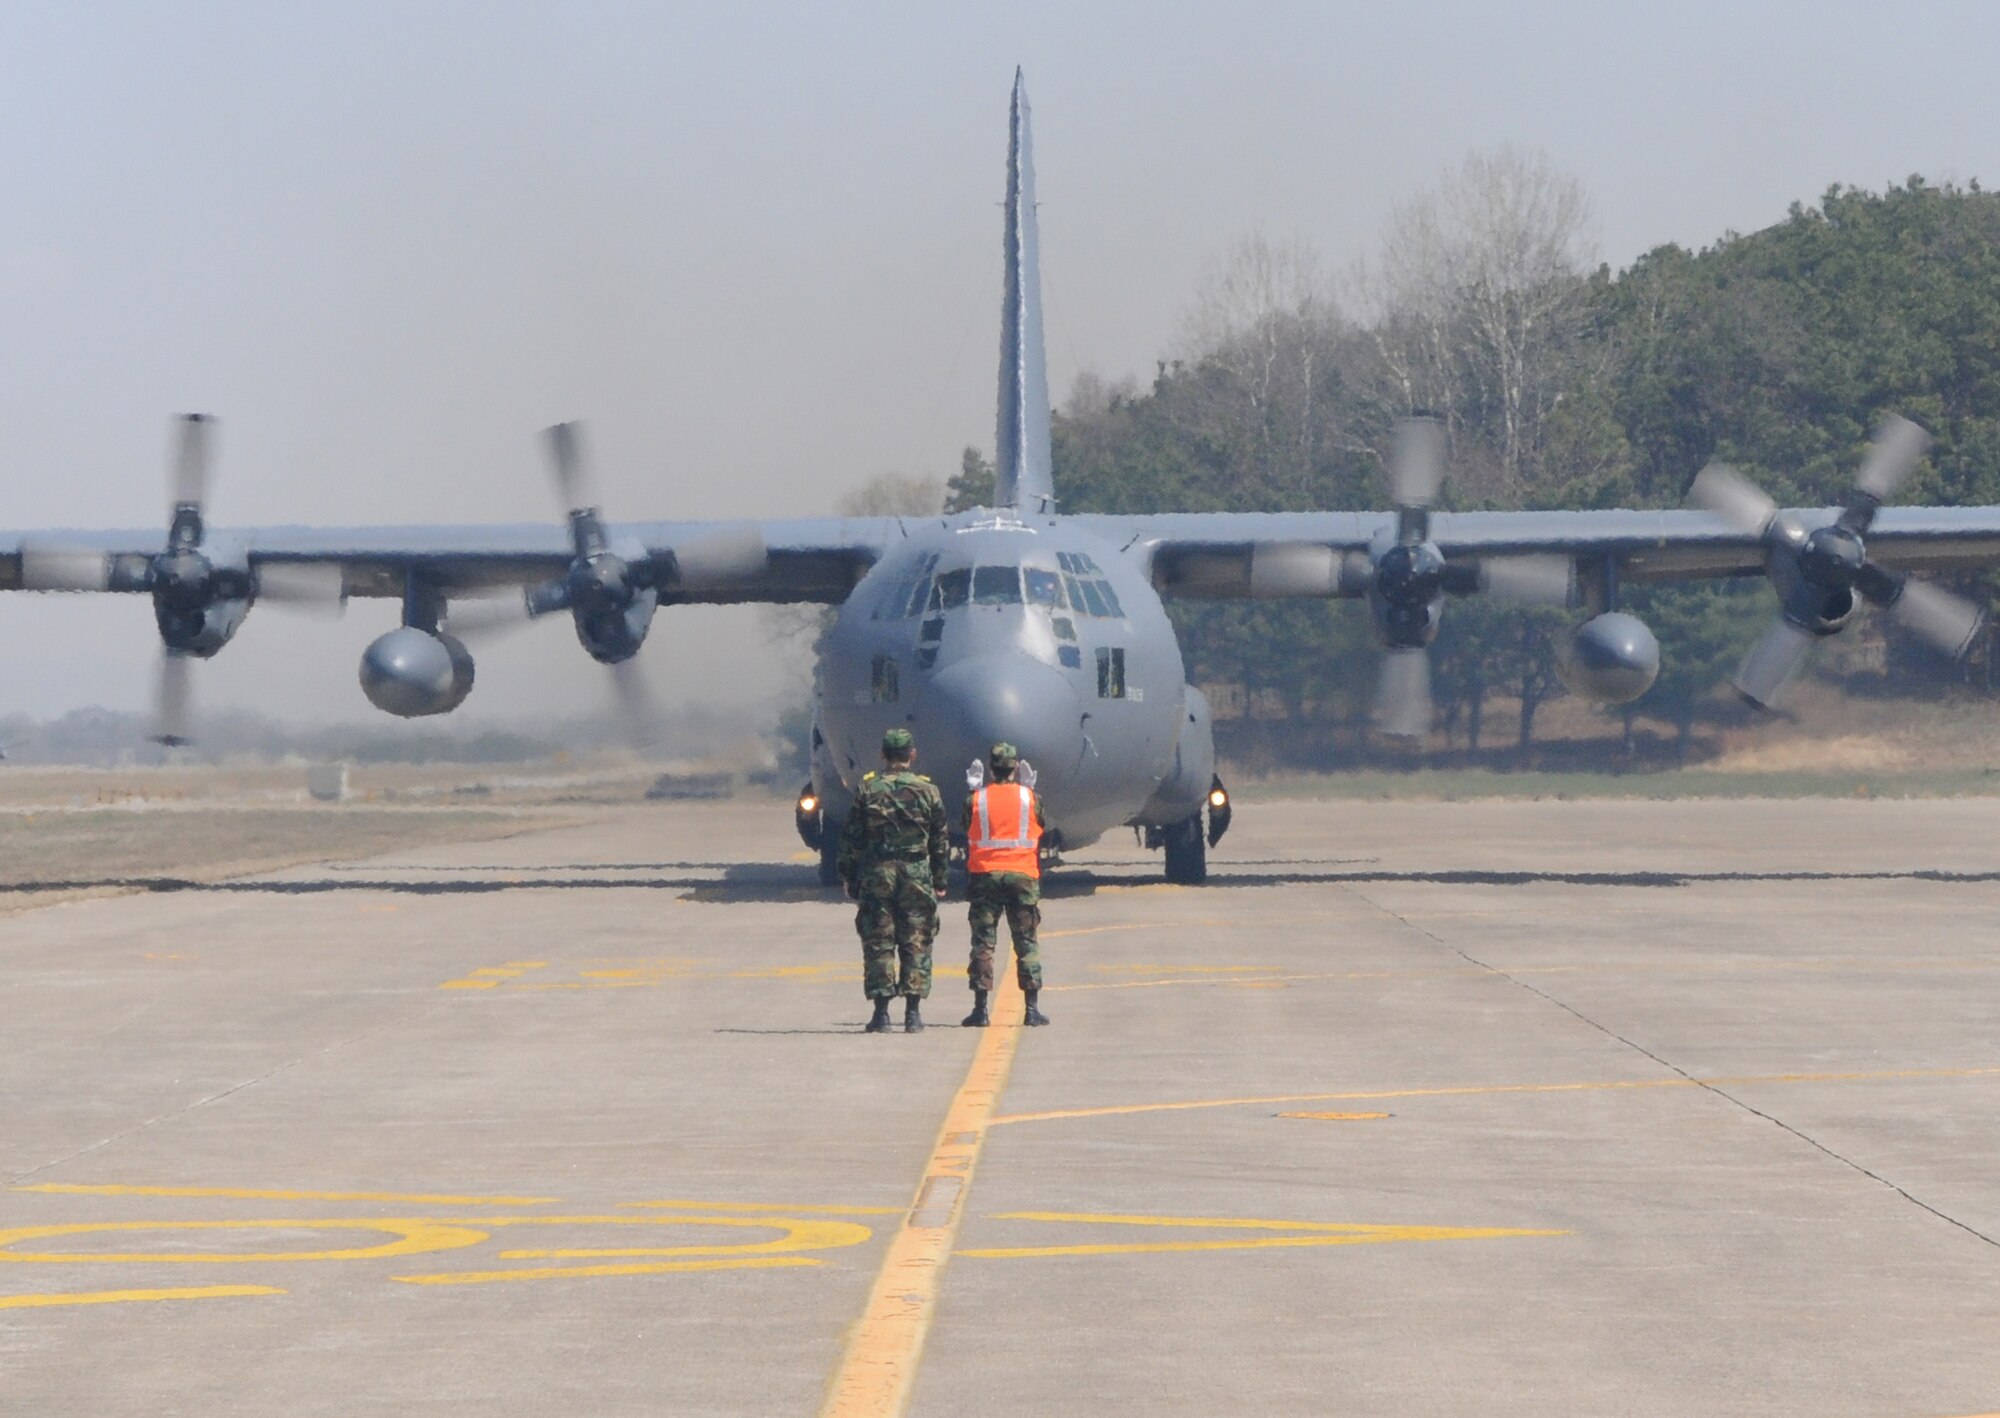 CHEONG JU AIR BASE, Republic of Korea -- A member of the Republic of Korea Air Force marshals a 17th Special Operations Squadron MC-130P Combat Shadow to its parking spot here April 2. More than 70 U.S. and ROK Army soldiers jumped from two MC-130P's as part of a friendship jump between the two armies. (U.S. Air Force photo by Tech. Sgt. Aaron Cram)